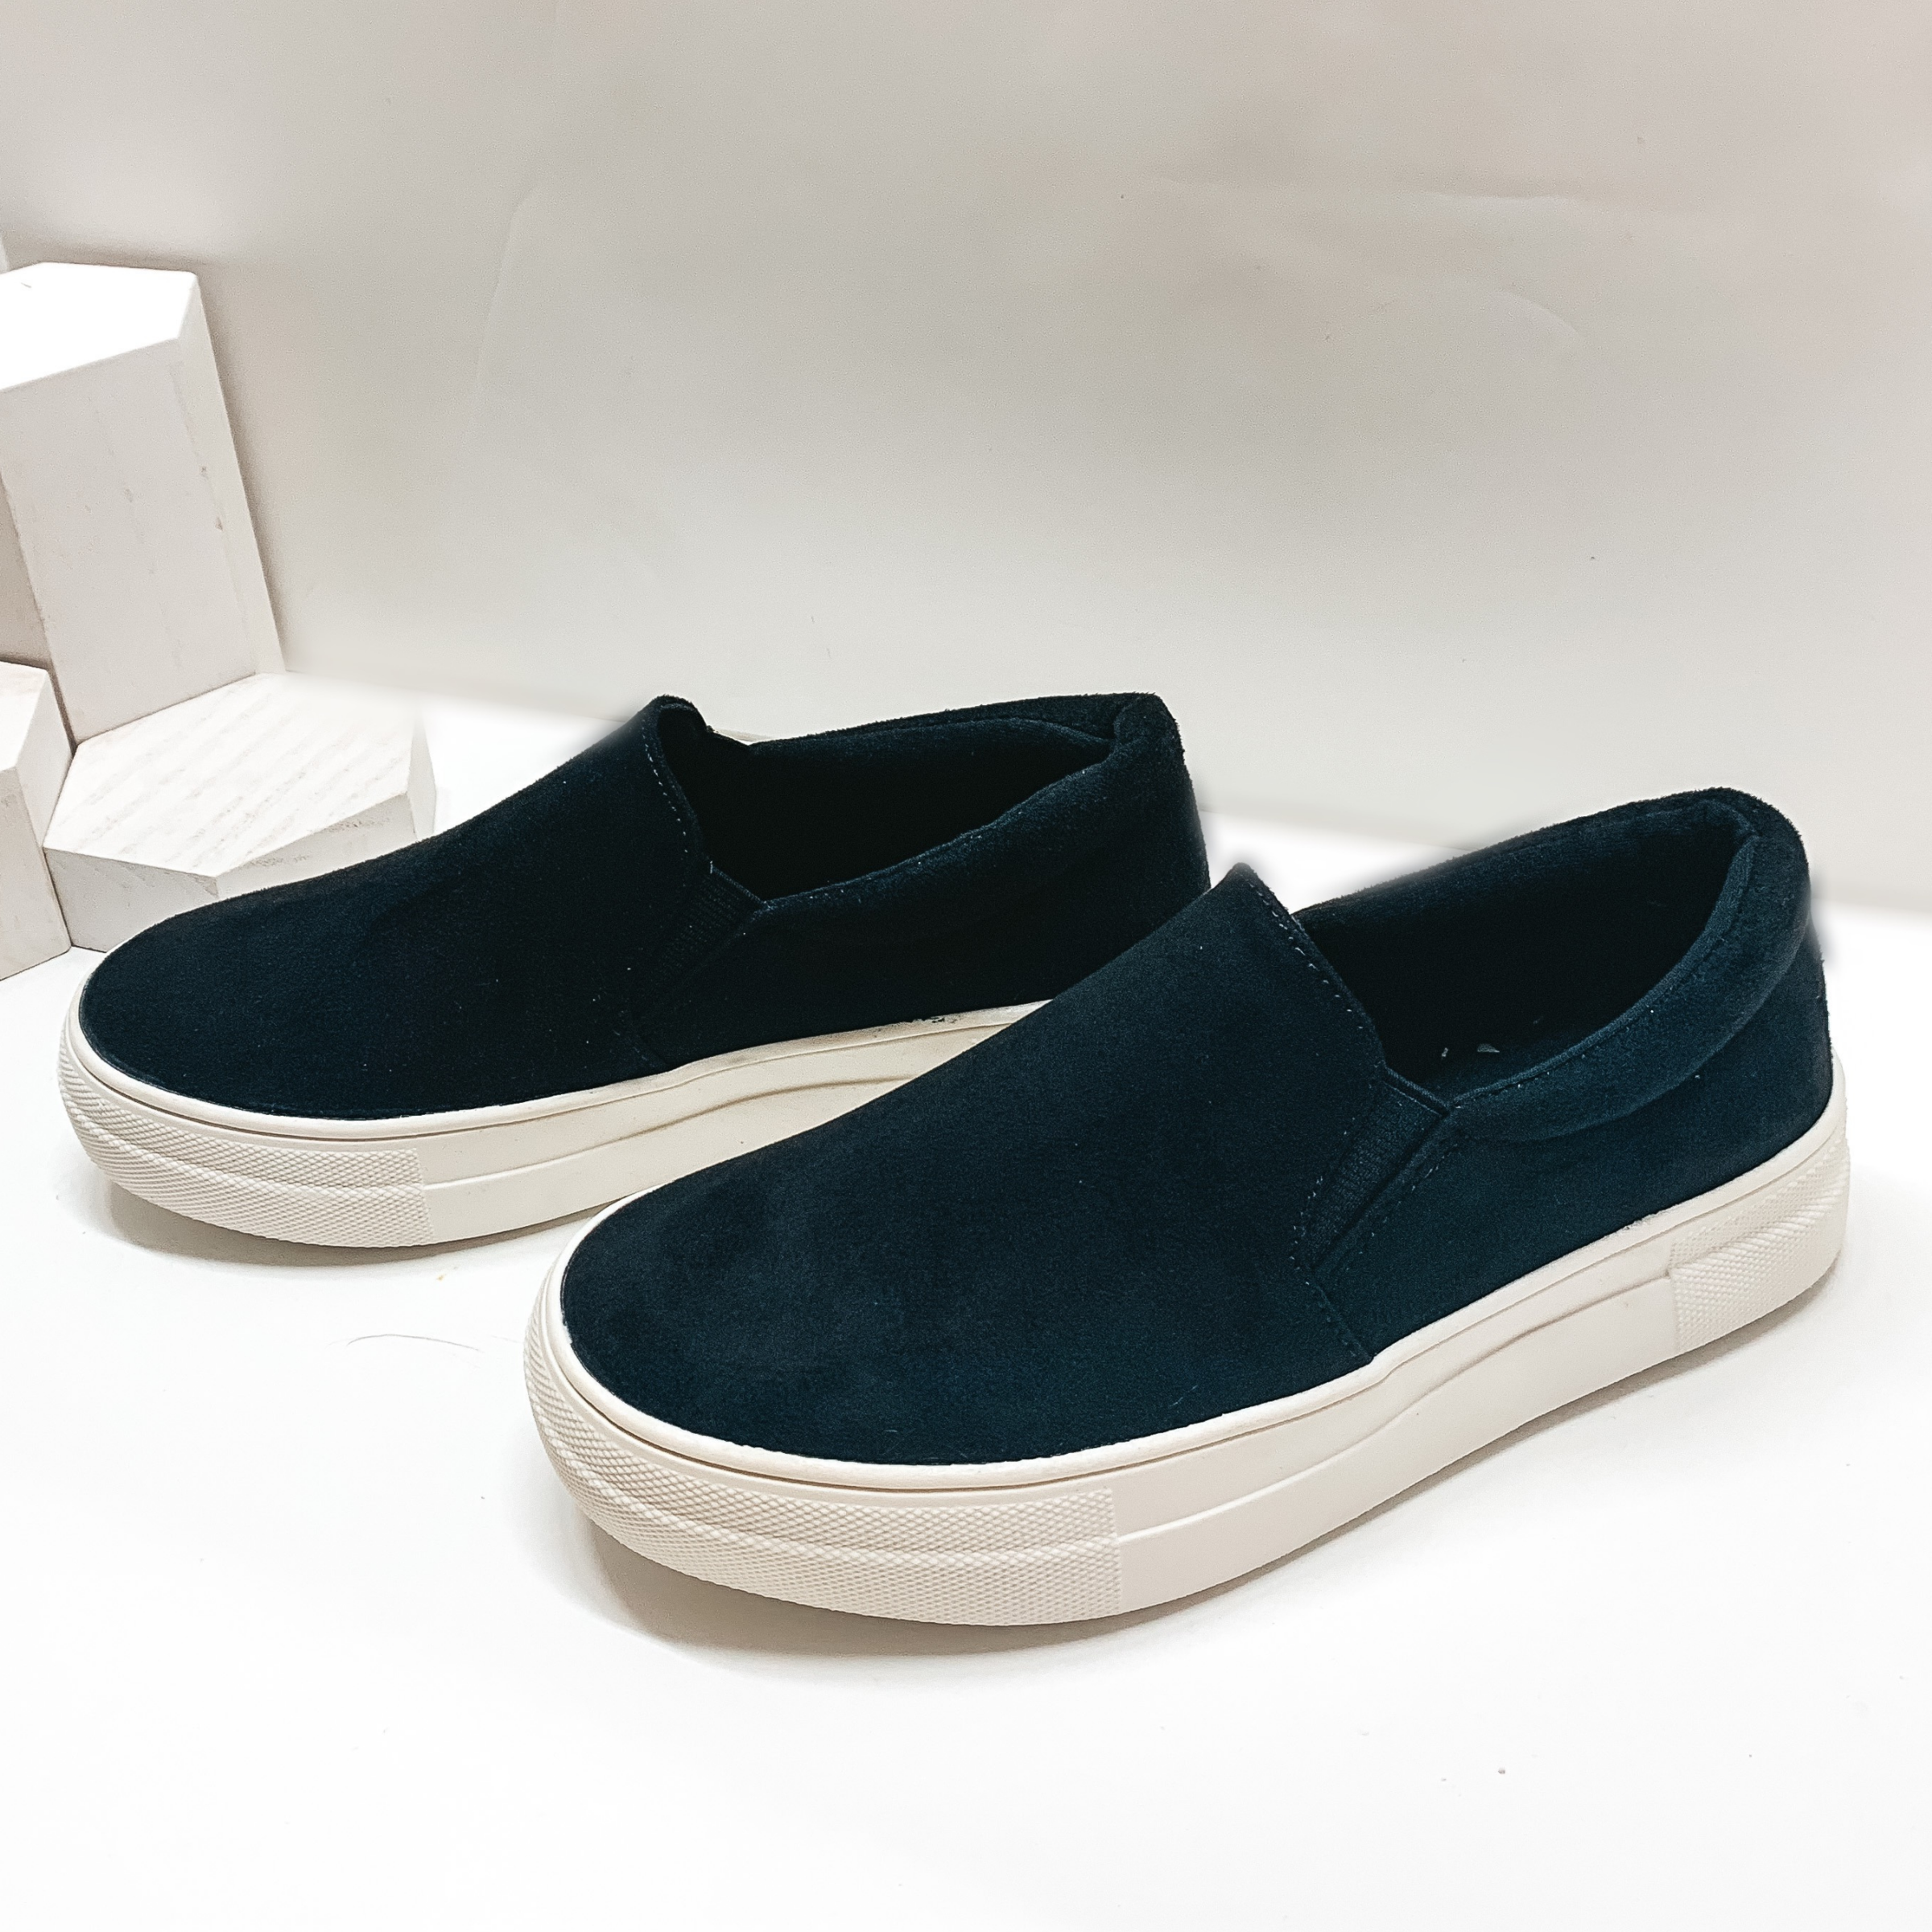 The Best Feeling Suede Slip On Sneakers in Black - Giddy Up Glamour Boutique